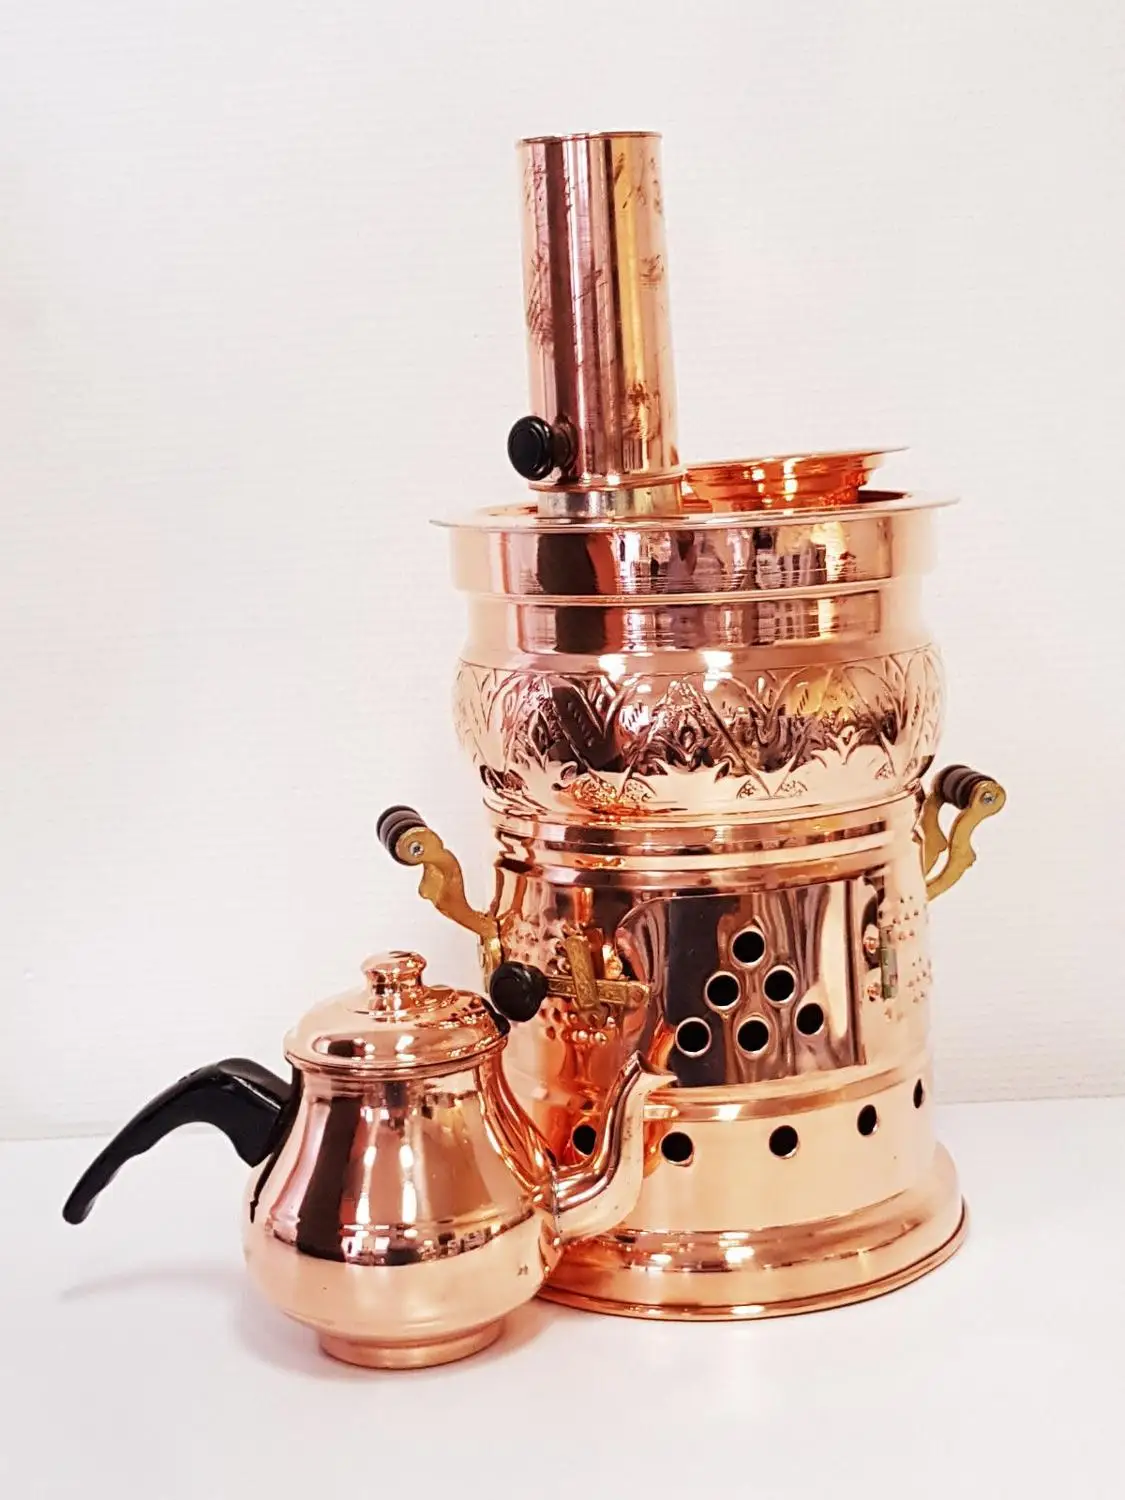 COPPER CHARCOAL SAMOVAR BOAT CAMPING HIKING WATER HEATER STOVE KETTLE TEA POT 